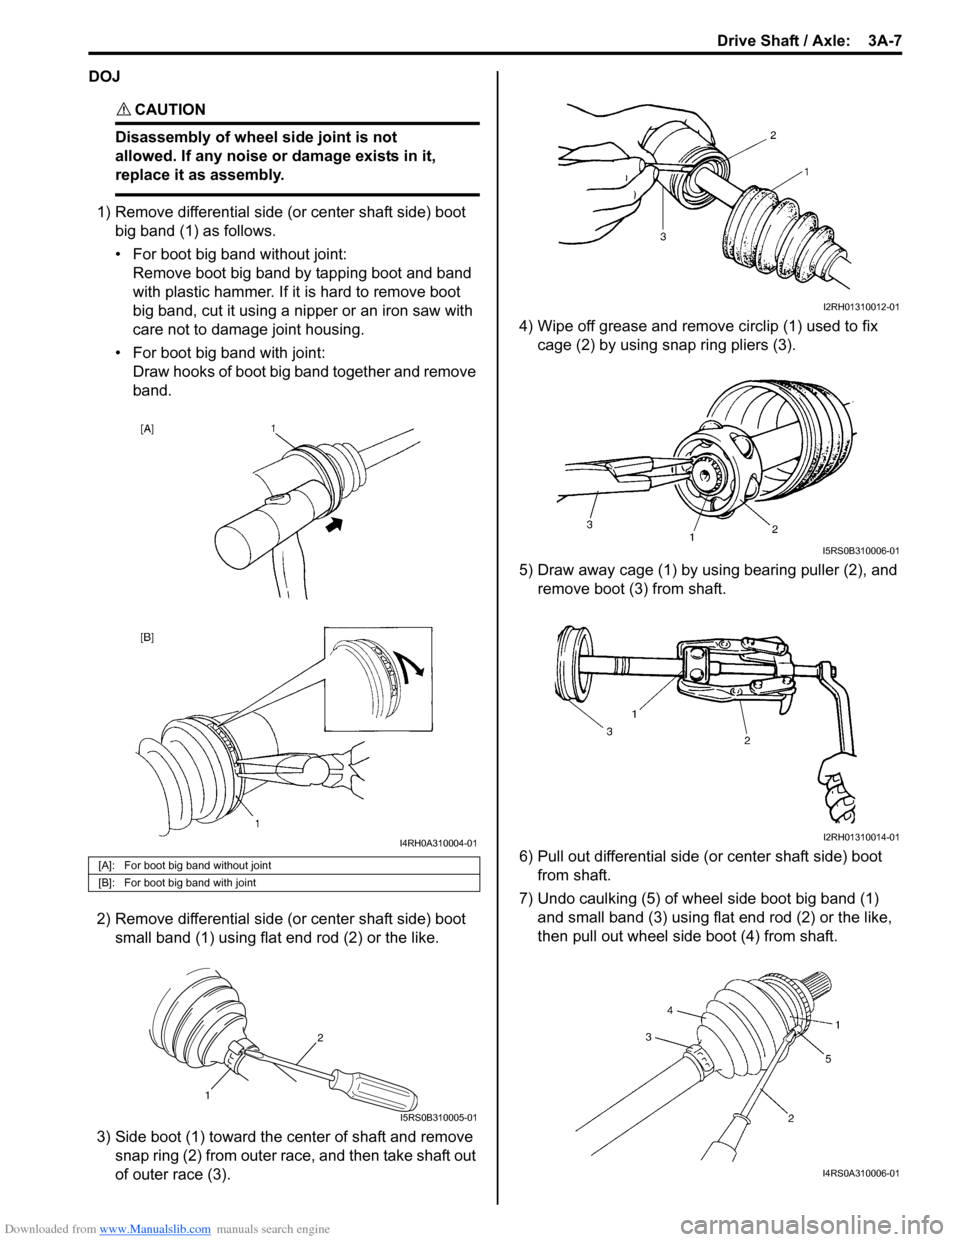 SUZUKI SWIFT 2005 2.G Service Workshop Manual Downloaded from www.Manualslib.com manuals search engine Drive Shaft / Axle:  3A-7
DOJ
CAUTION! 
Disassembly of wheel side joint is not 
allowed. If any noise or damage exists in it, 
replace it as as